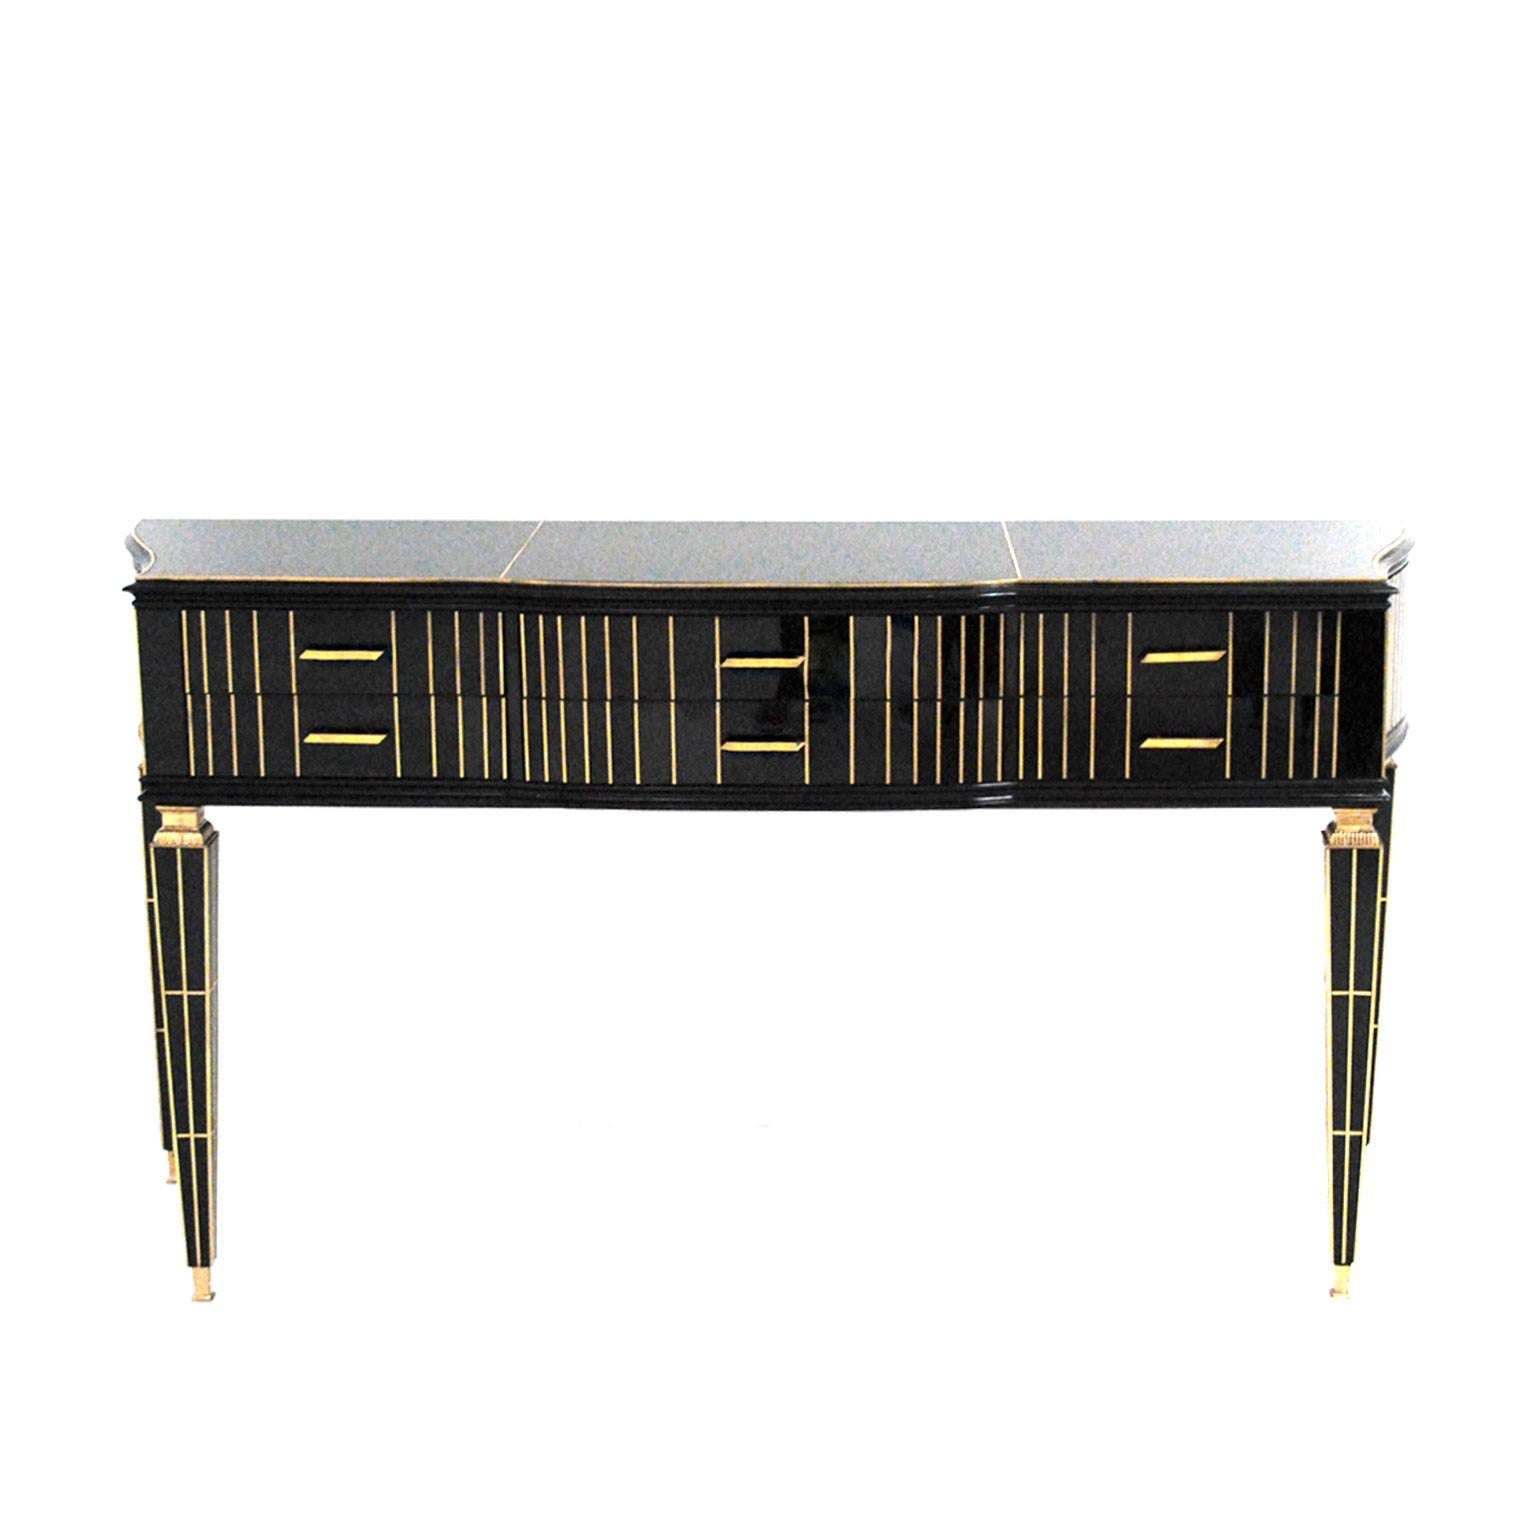 Contemporary Italian commode composed of six drawers, with structure made of solid wood covered in black Murano glass and brass details.

Our main target is customer satisfaction, so we include in the price for this item professional and custom made